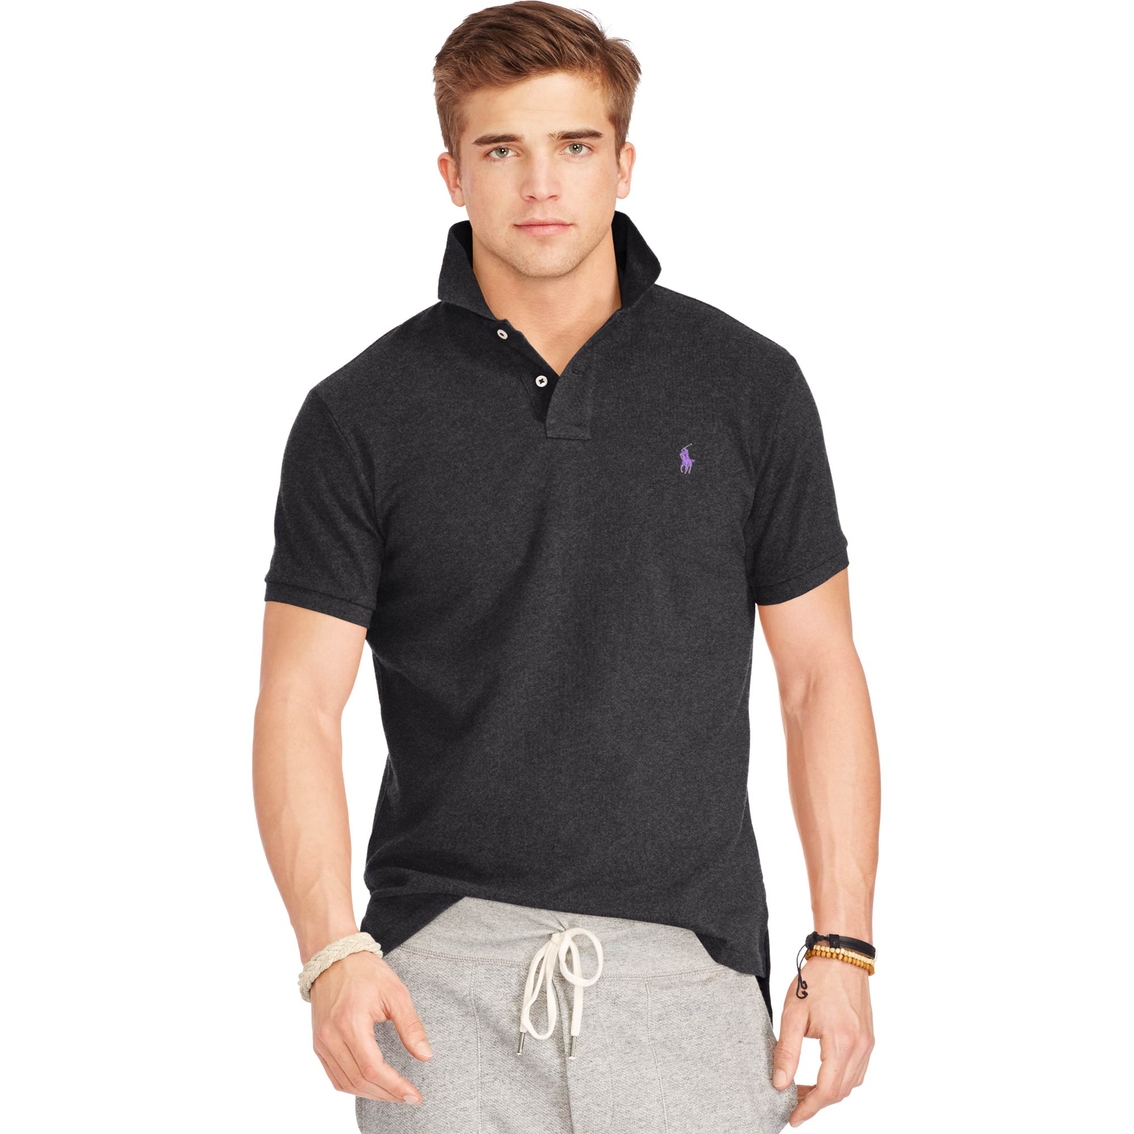 polo ralph lauren classic fit polo